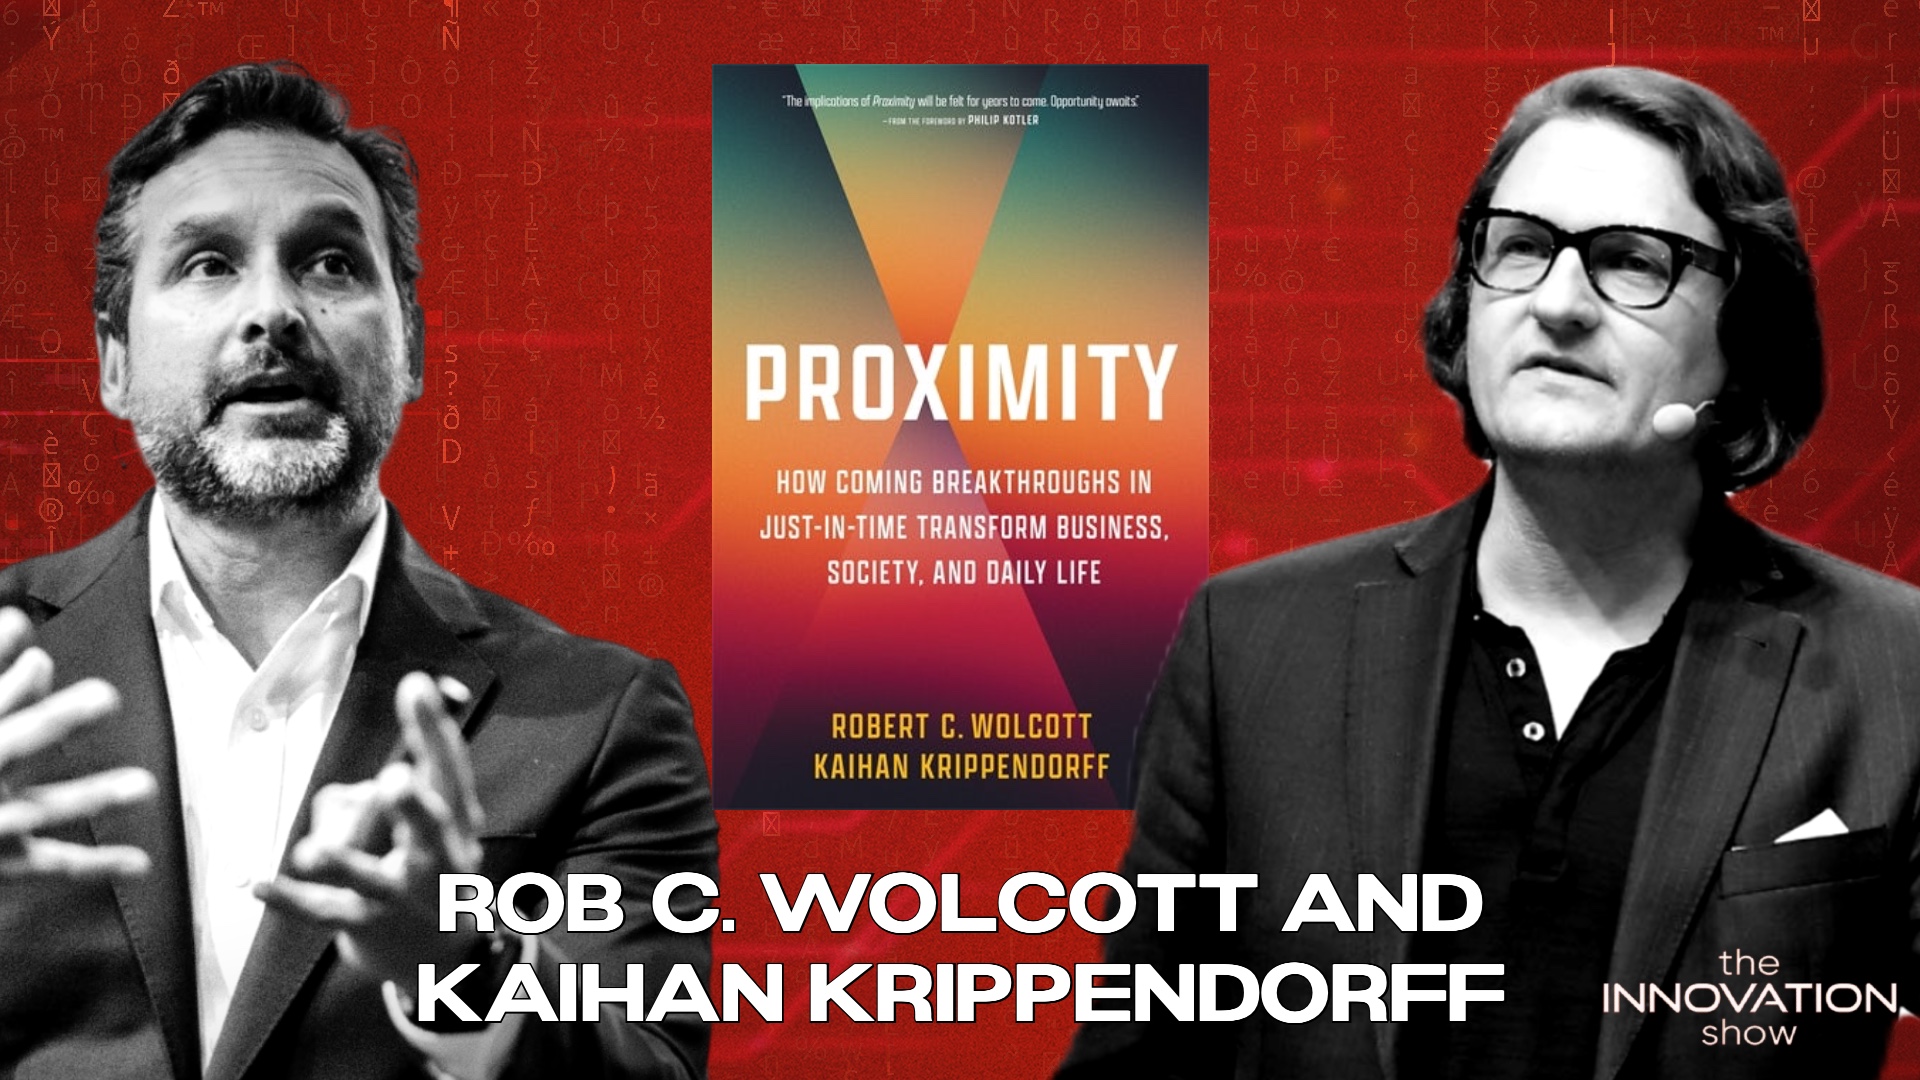 Image of authors Rob C. Wolcott and Kaihan Krippendorff and their book Proximity